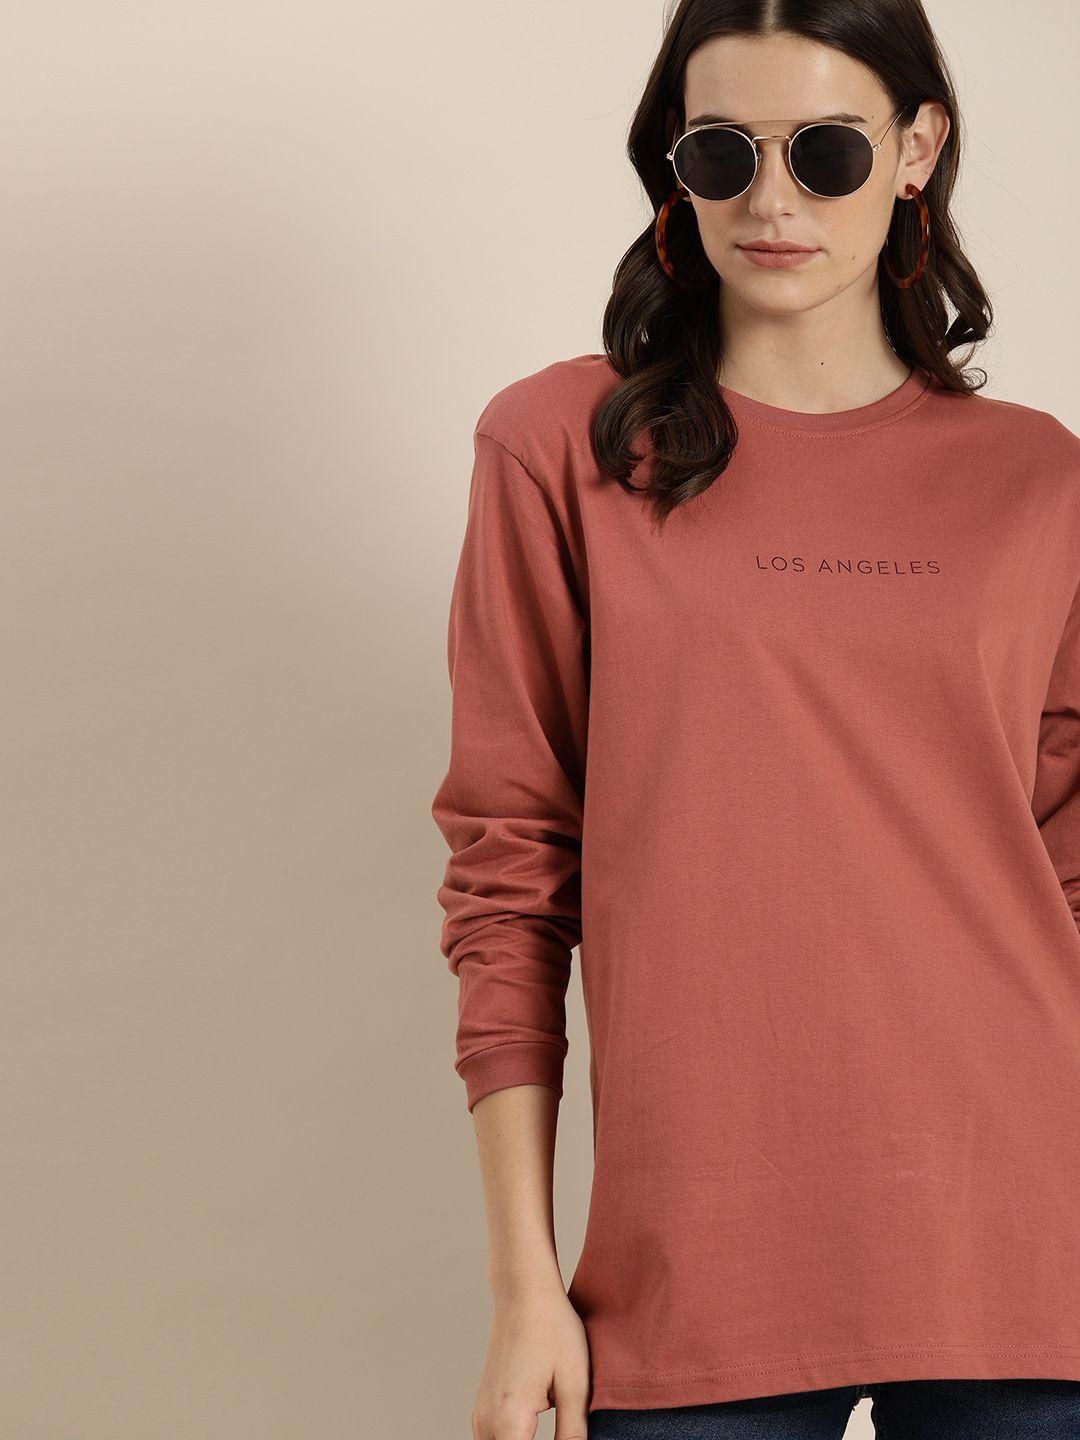 dillinger-women-brown-printed-round-neck-oversized-t-shirt